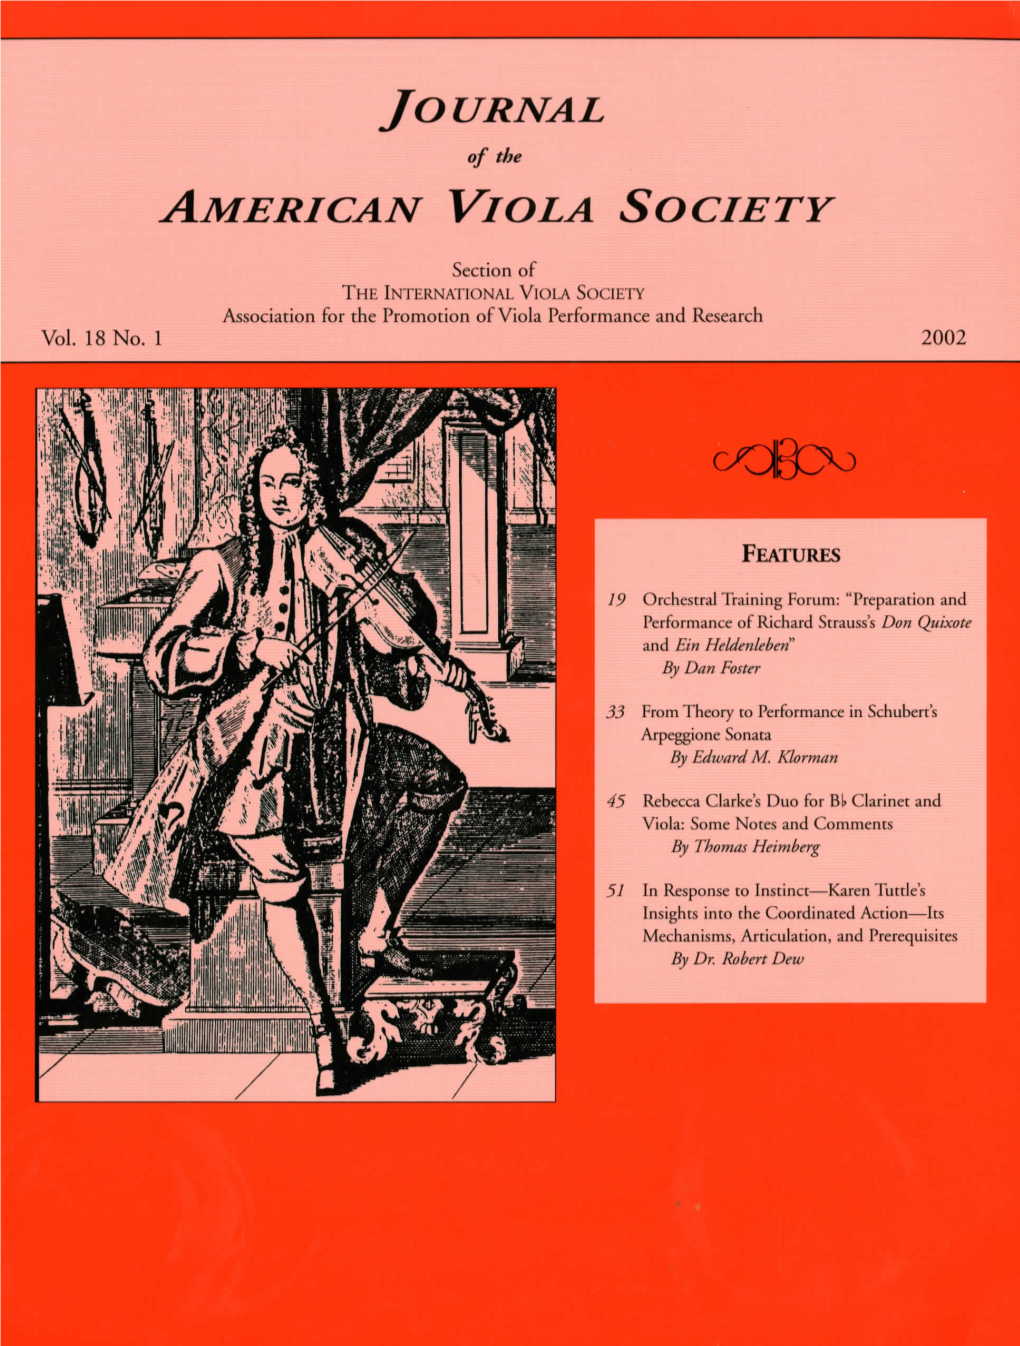 Journal of the American Viola Society Volume 18 No. 1, 2002